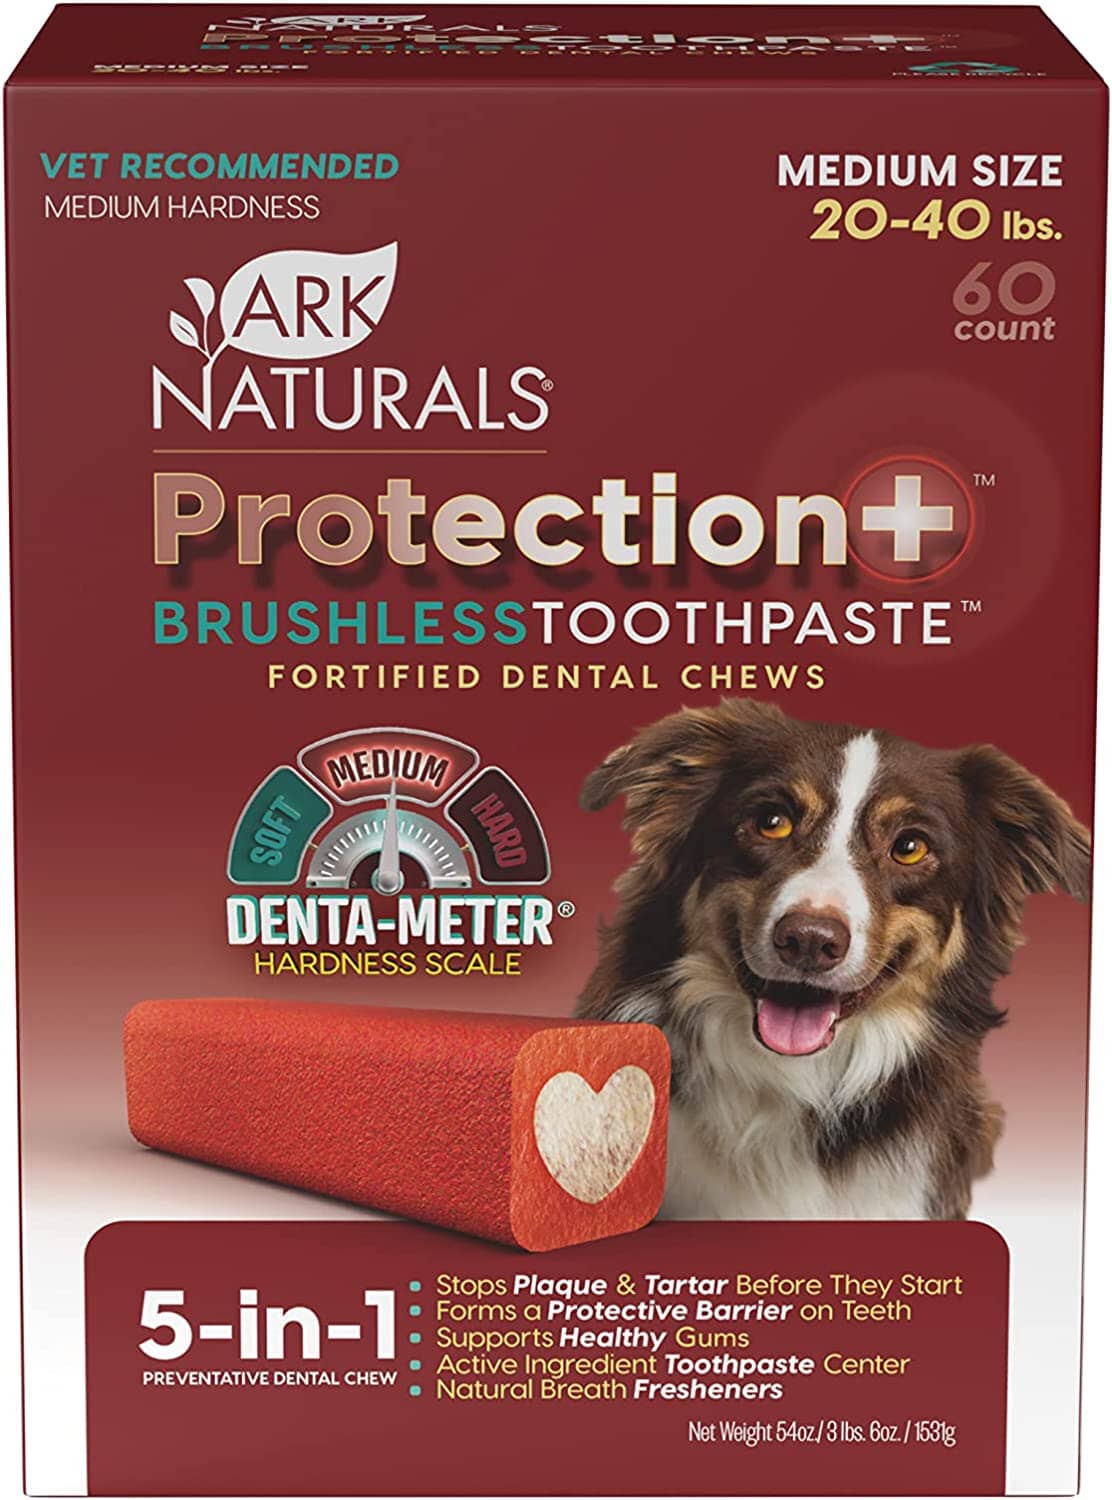 Ark Naturals Protection+ Brushless Toothpaste Value Pack Dental Dog Chews - Medium - 60 Count Box  